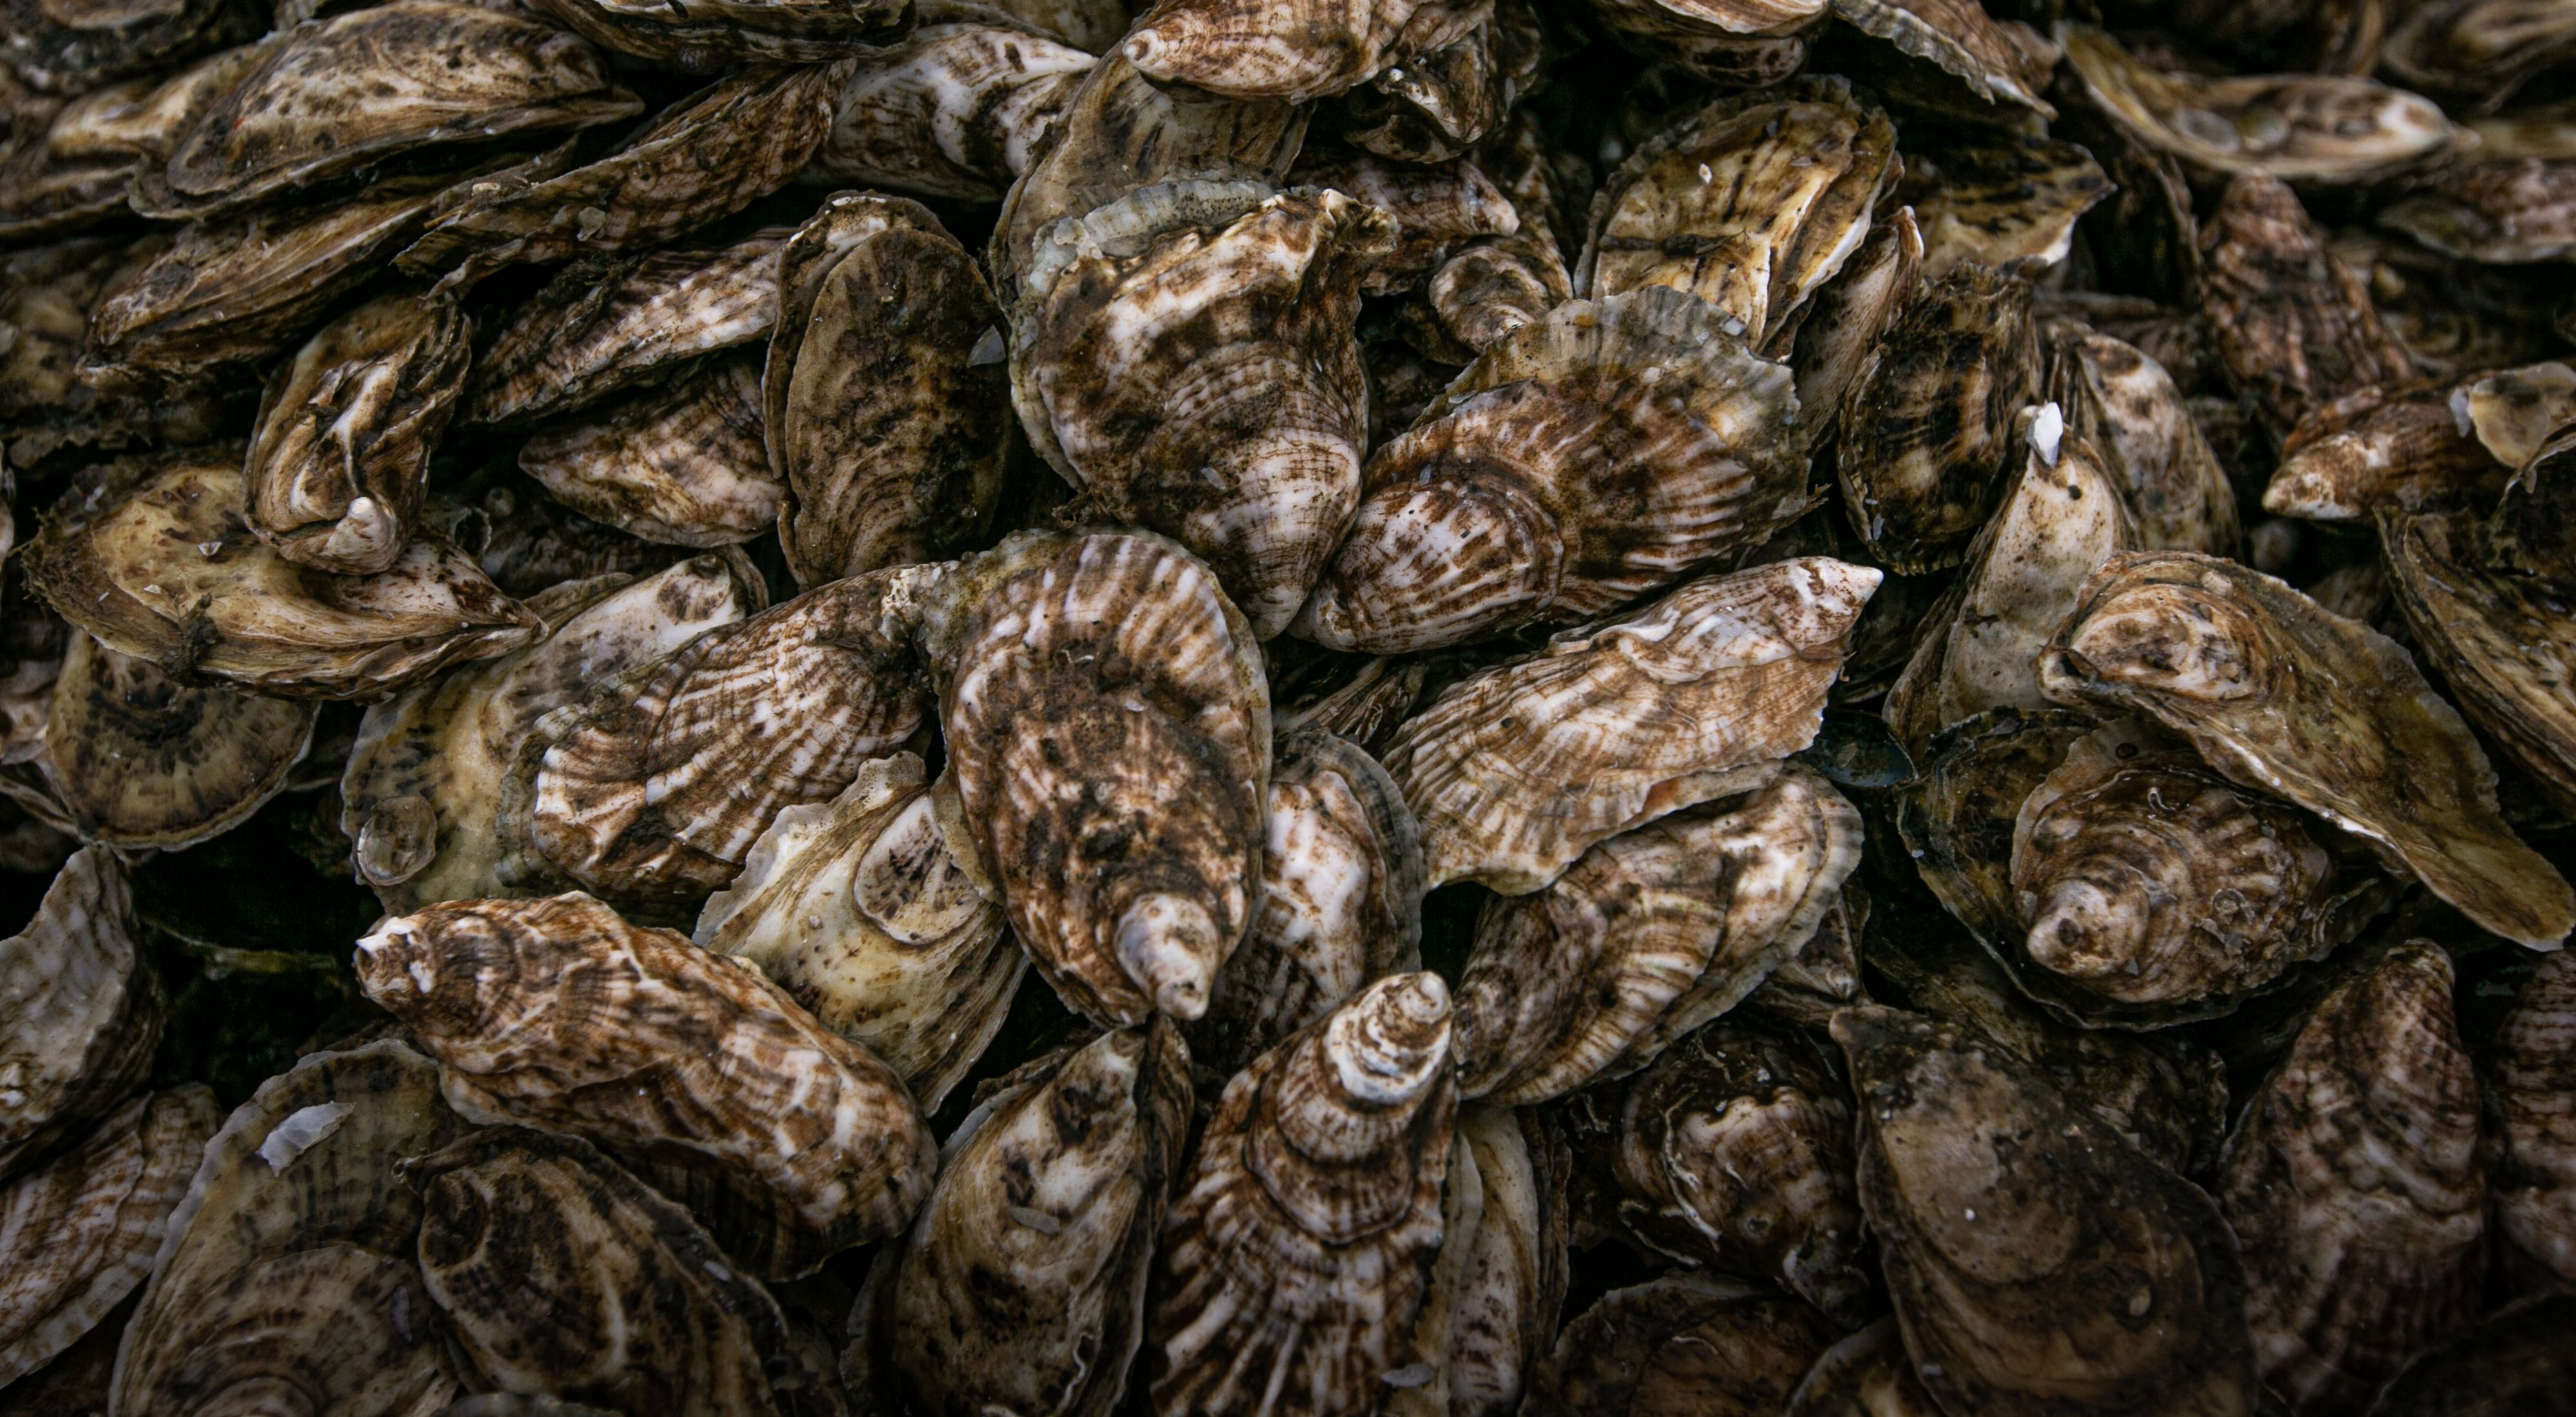 Closeup showing oysters filling the field of view.